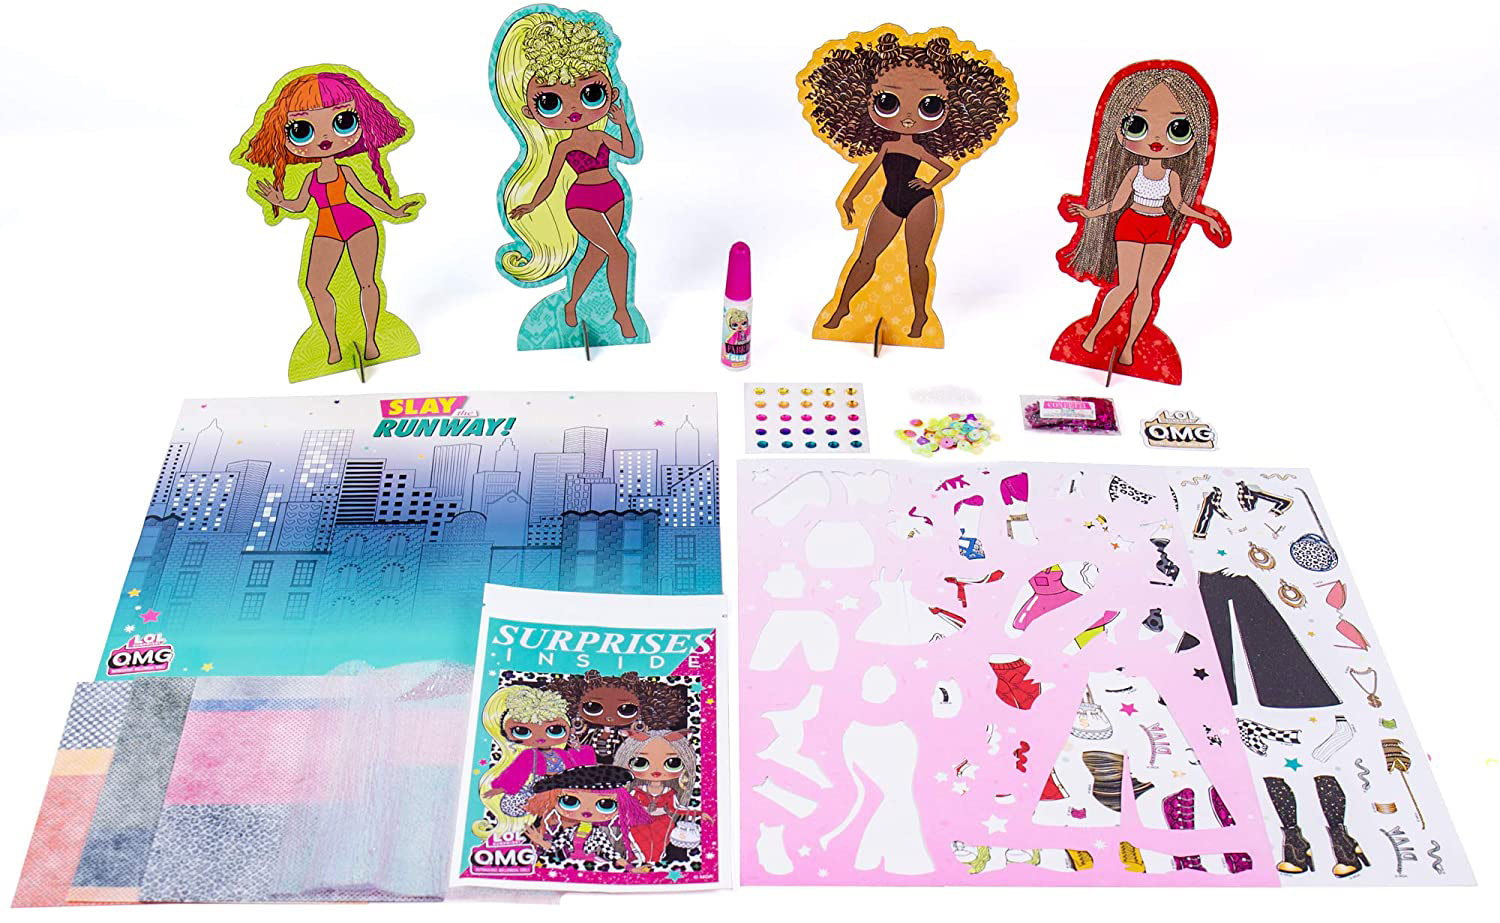 LOL OMG Dress up studio with 4 paper dolls - YouLoveIt.com